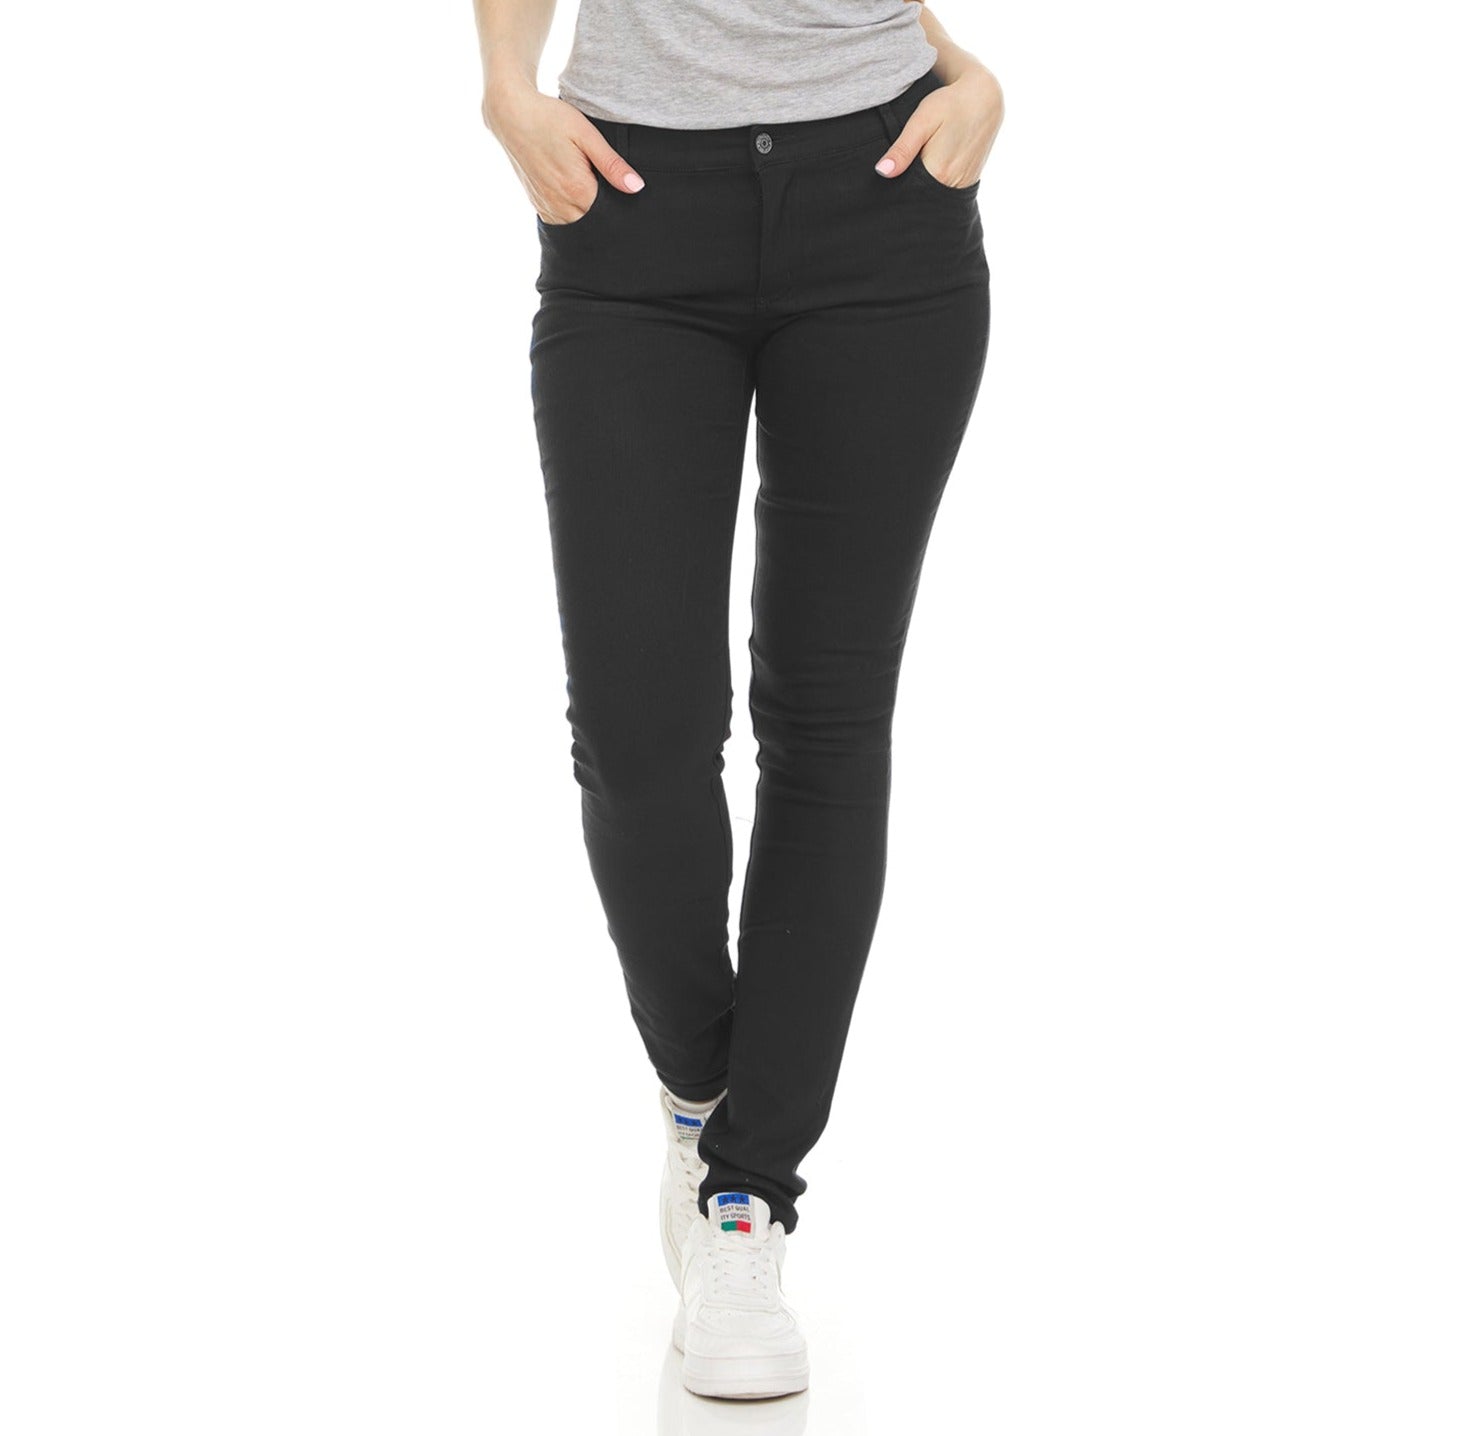 ShoSho Womens Skinny Pants Slim Fit Trousers with India